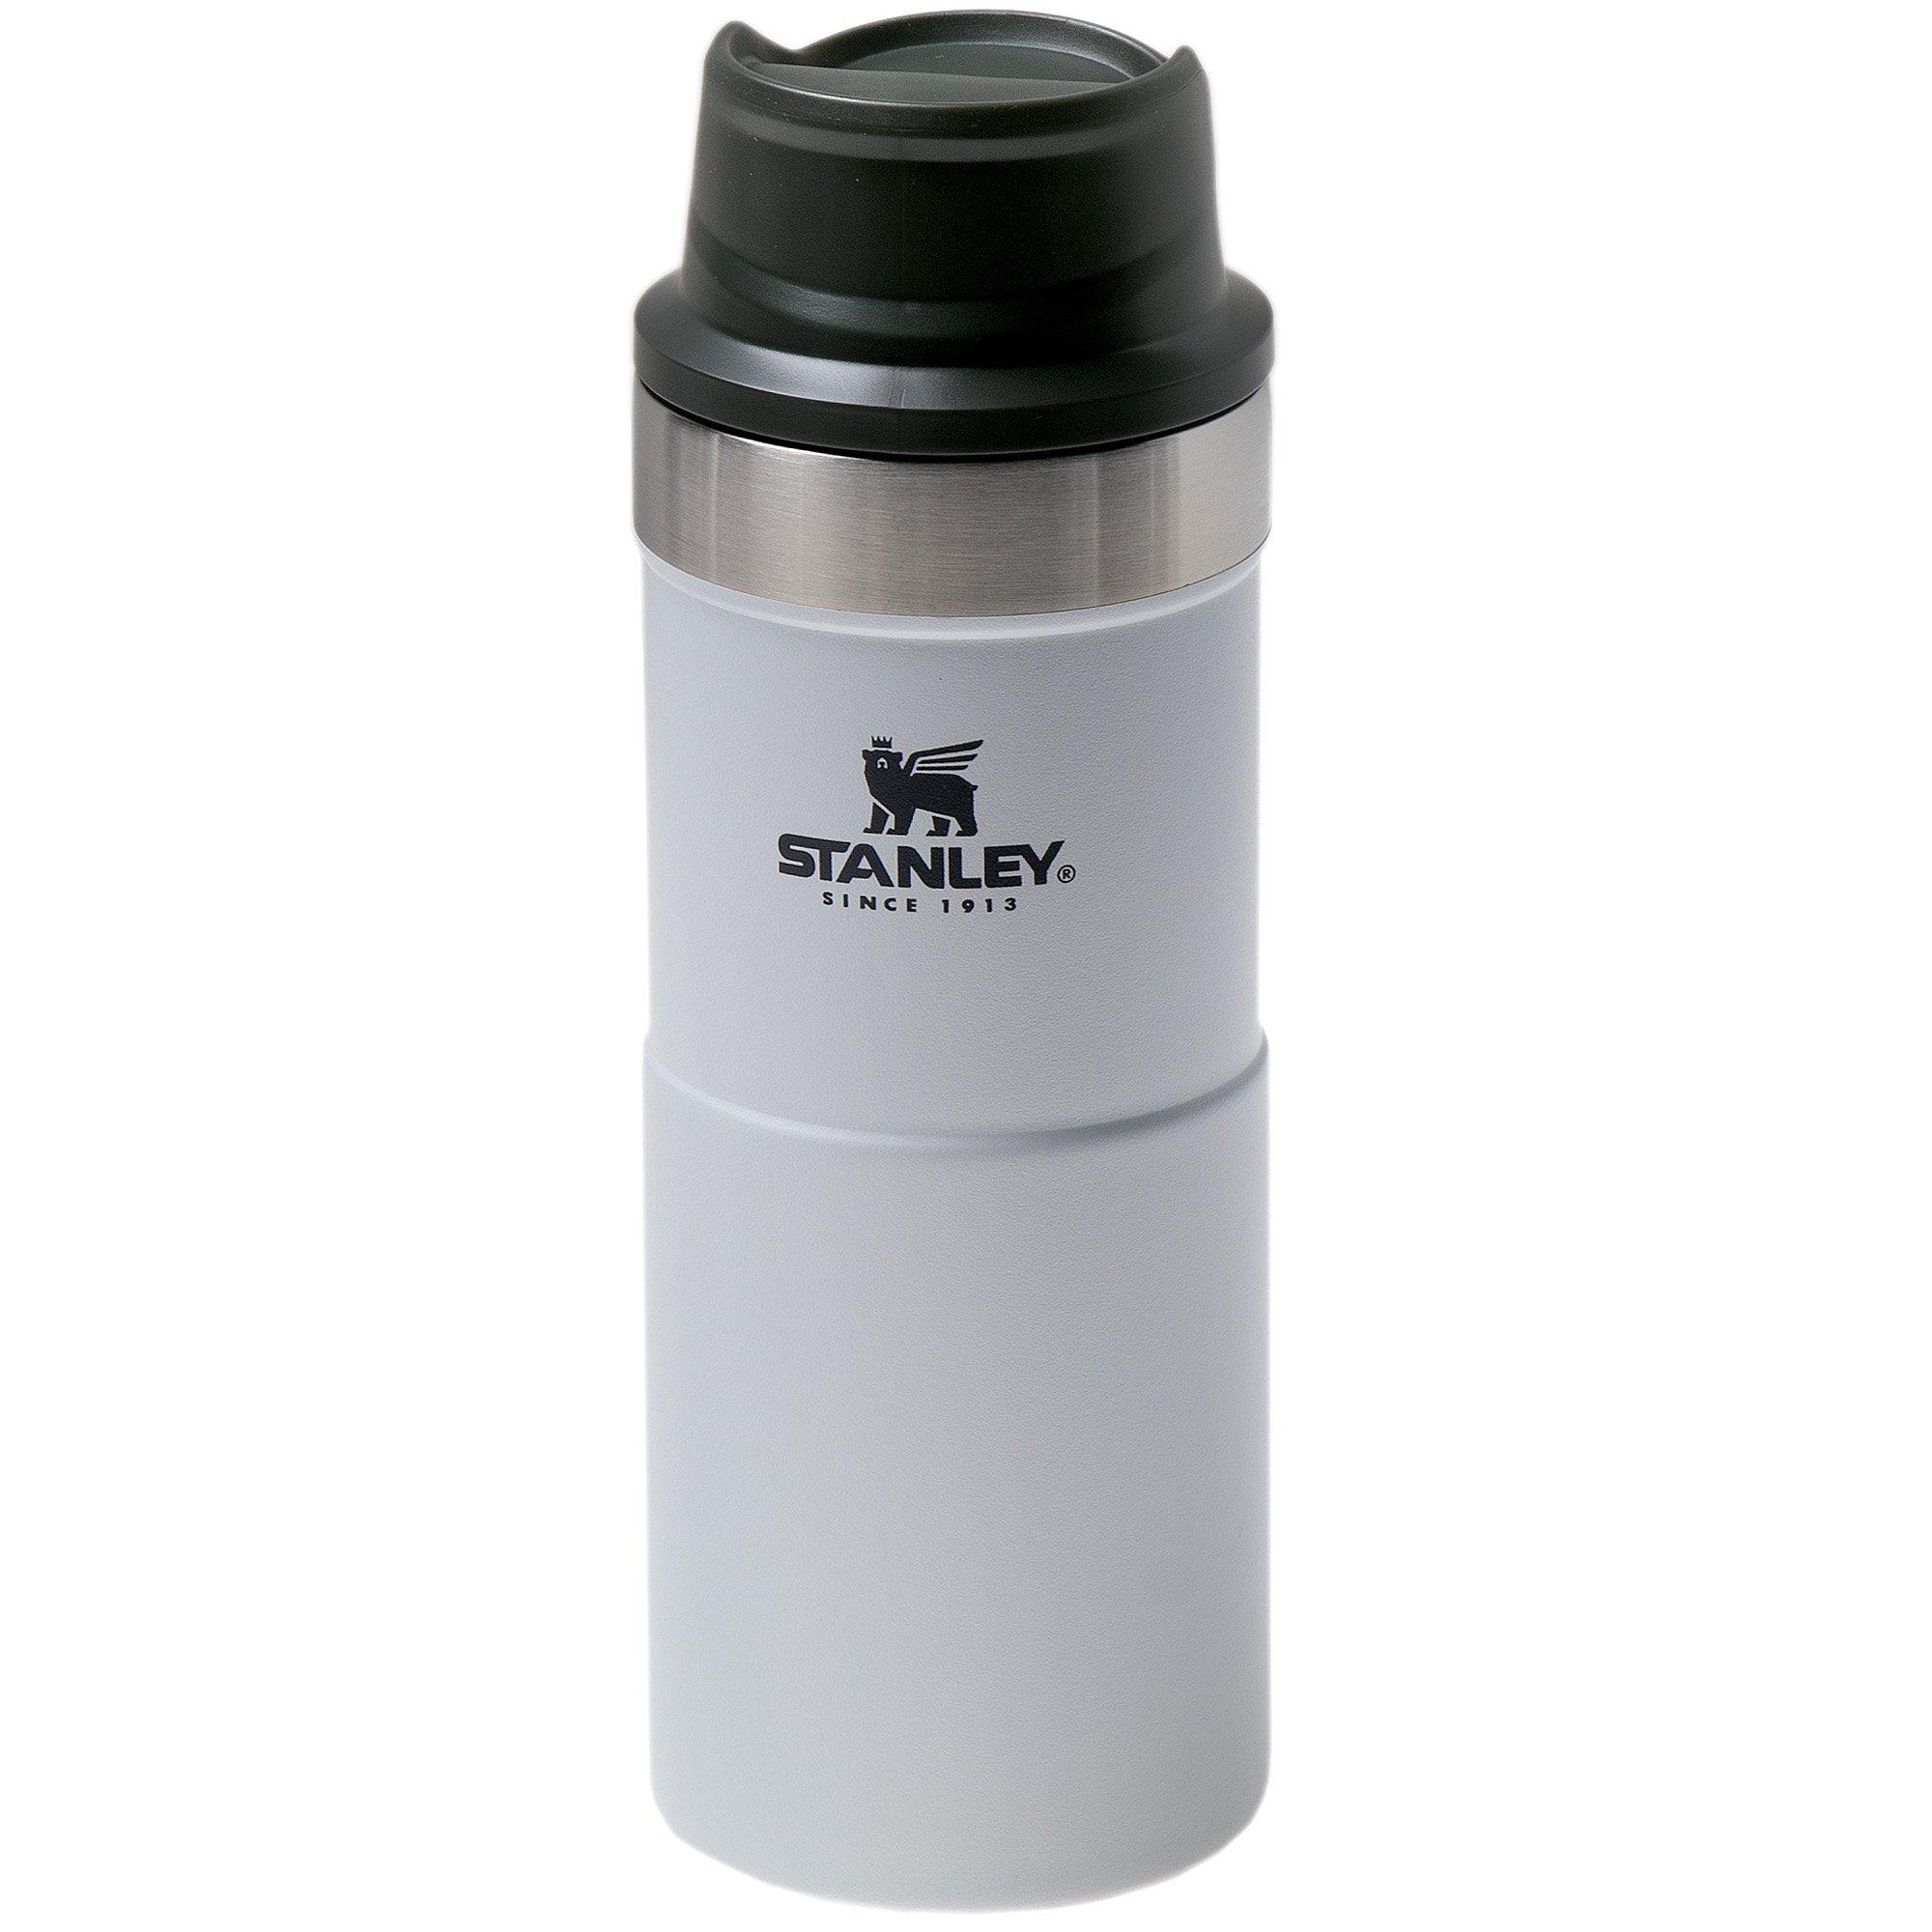 Classic Trigger Action Travel Mug, Insulated Coffee Tumbler